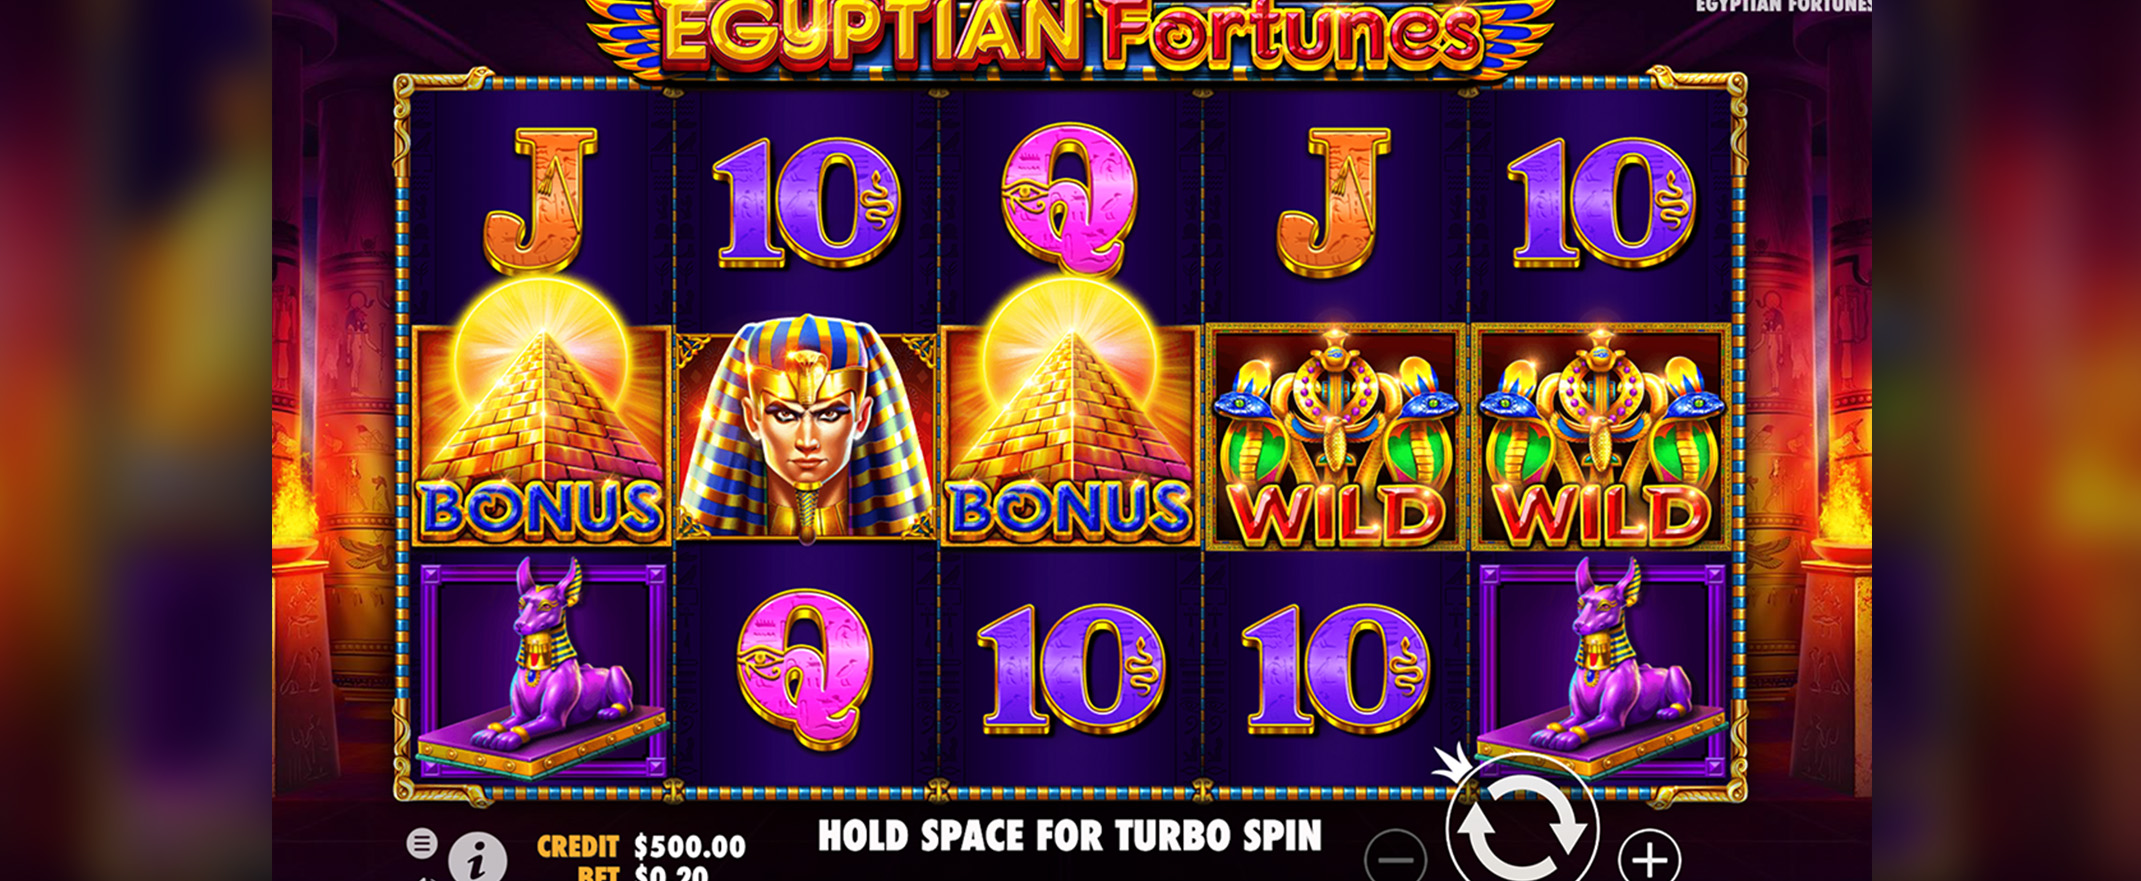 Egyptian Fortunes, new slot from Pragmatic Play